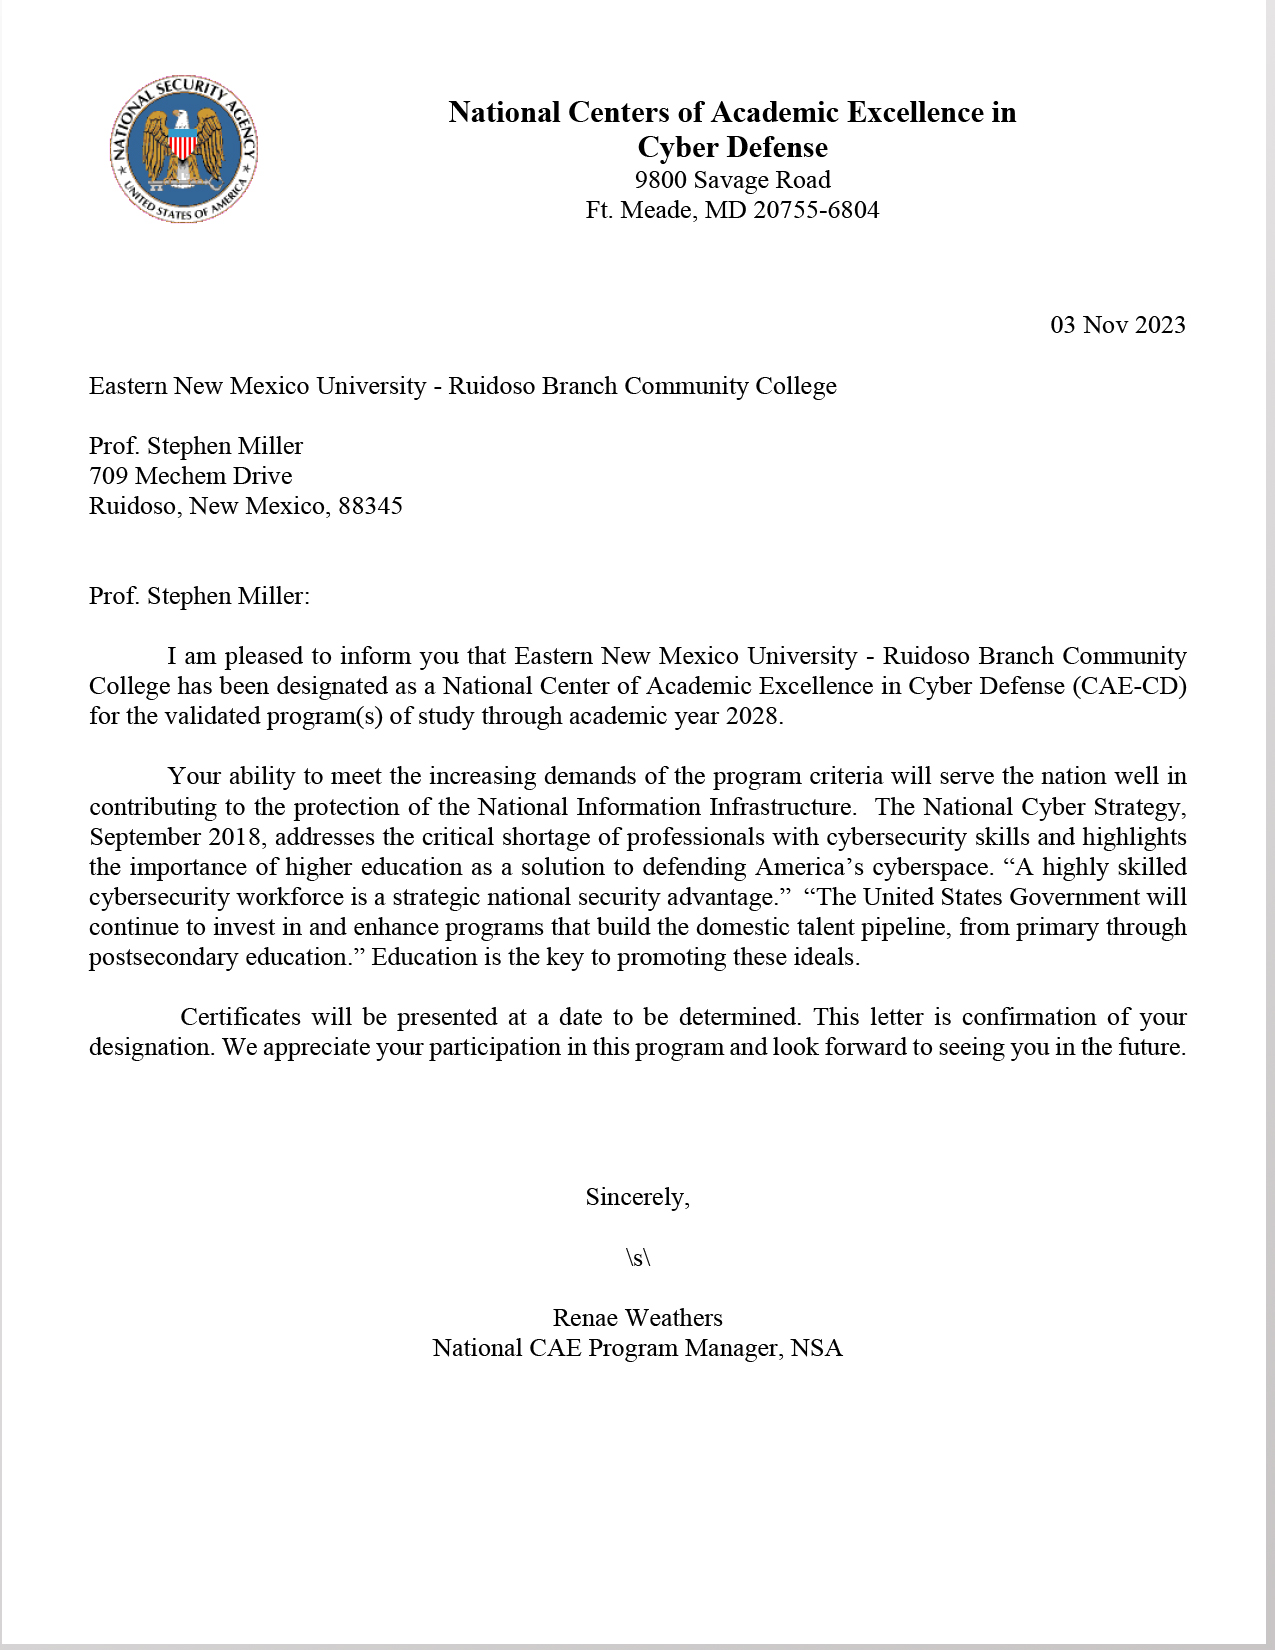 National Centers of Academic Excellence in Cyber Defense Designation letter, 2023